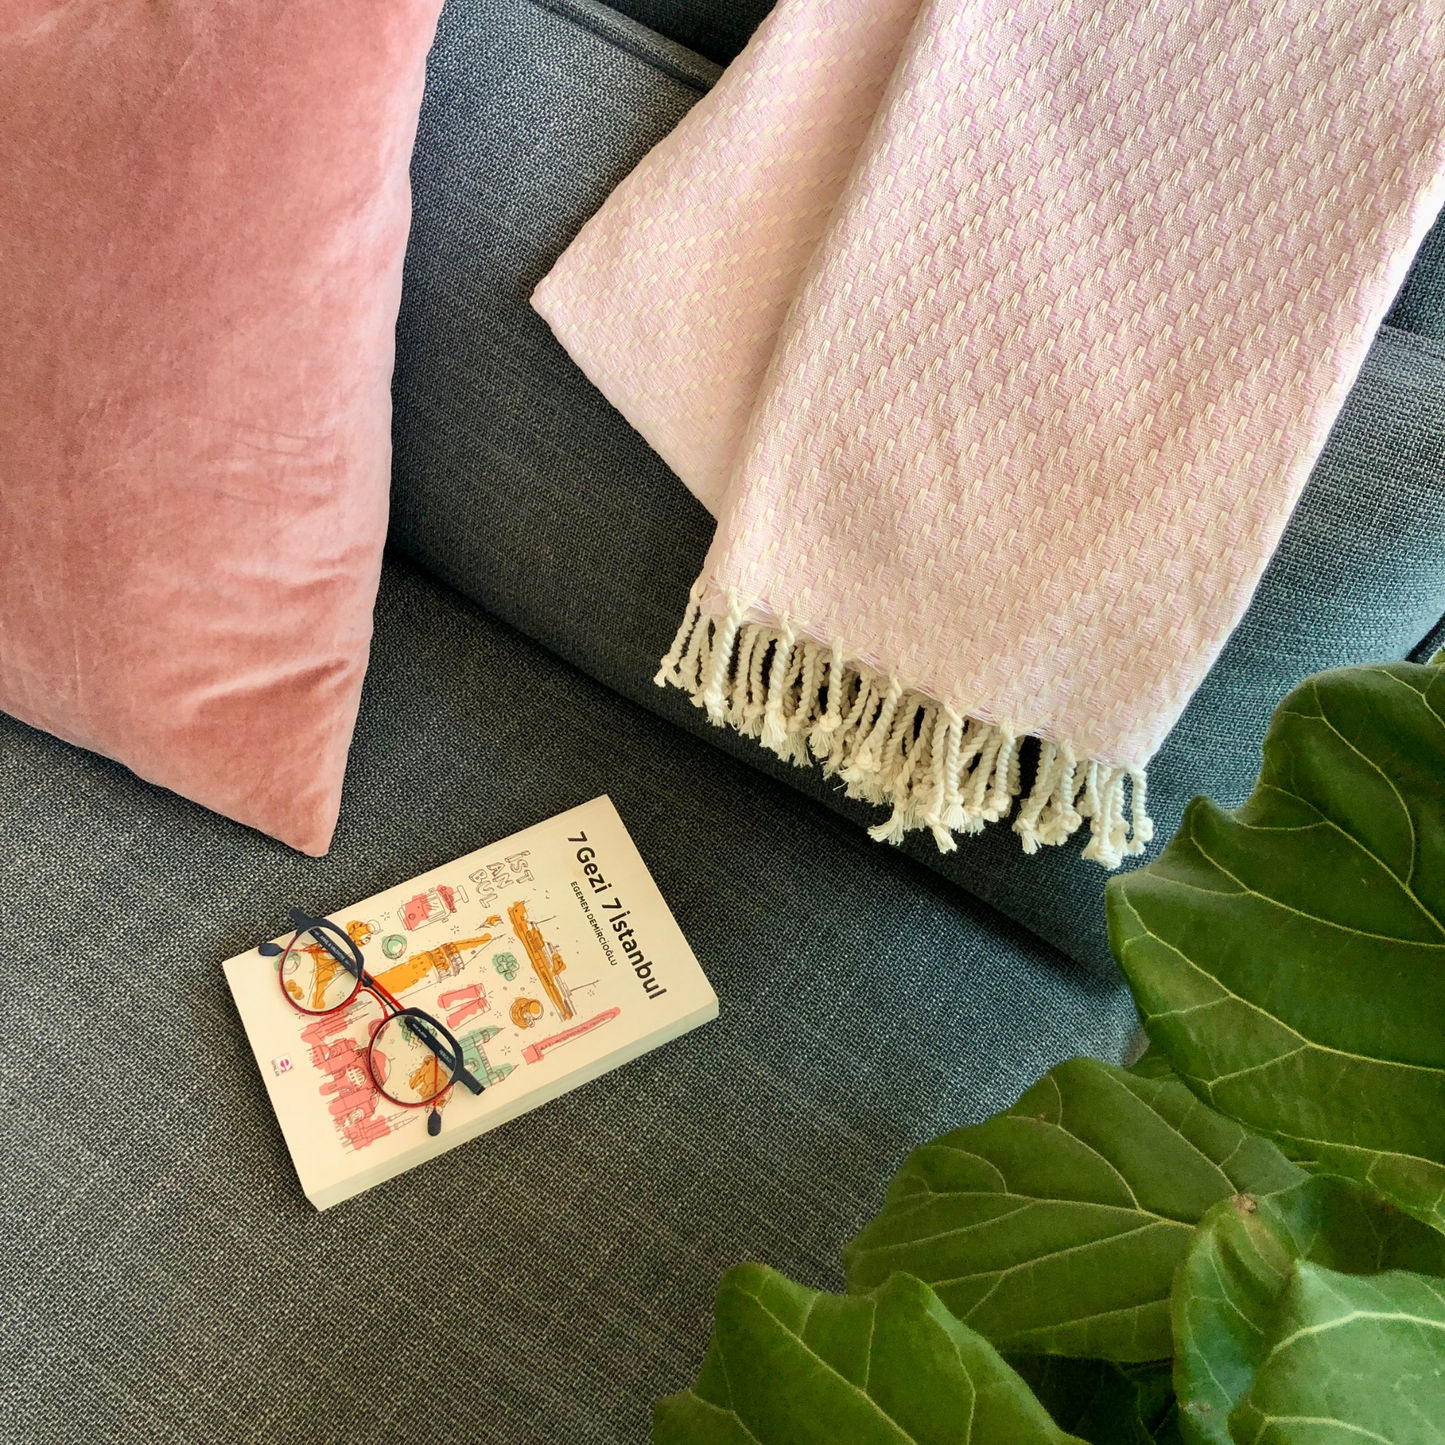 ISTANBUL Throw on grey sofa with pink pillow, Istanbul book and fiddle-leaf fig plant